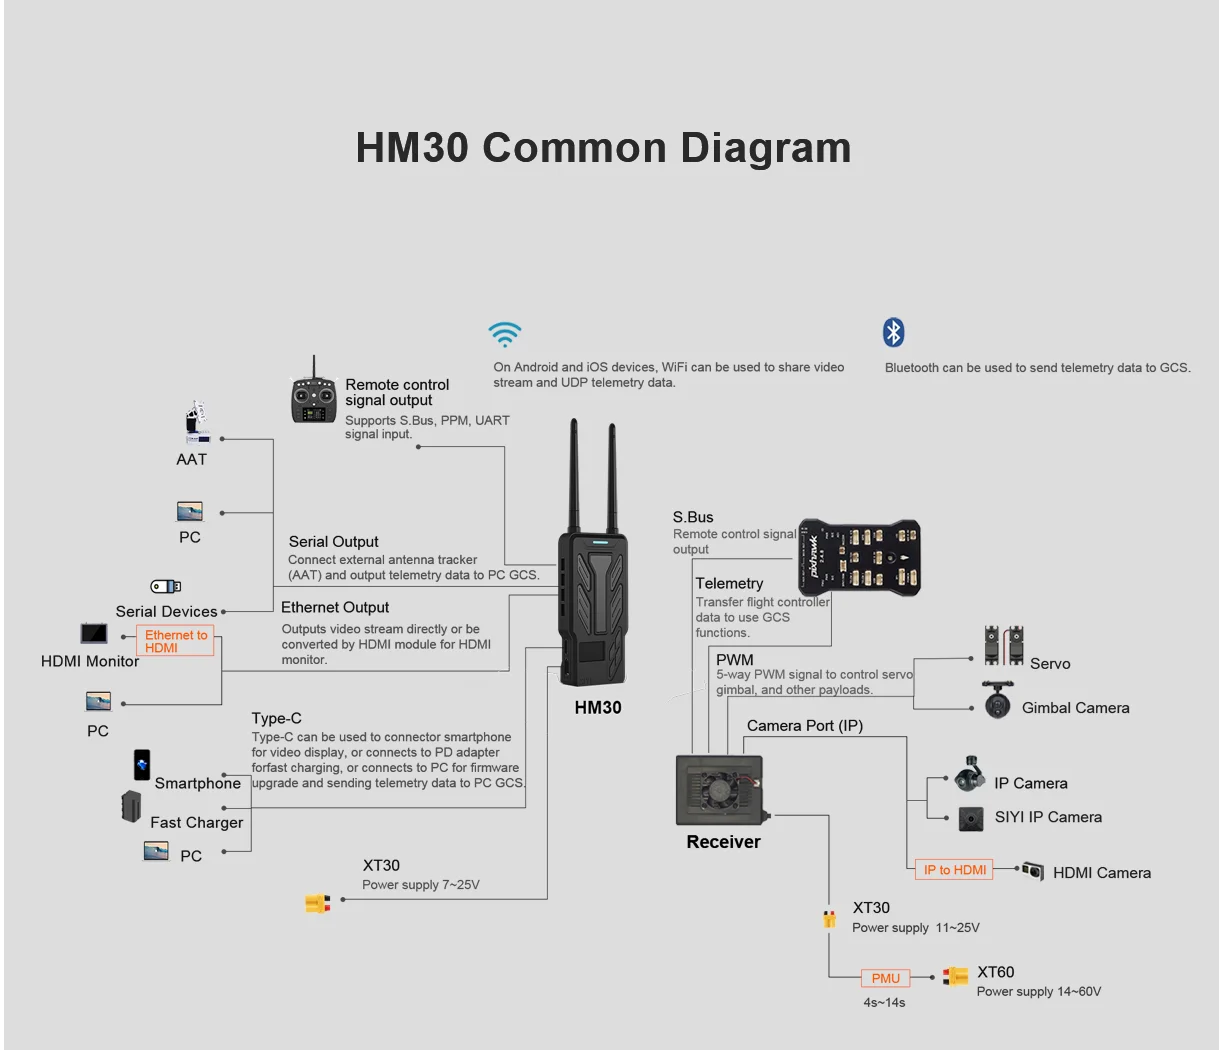 SIYI HM30 Transmitter, HM3O Common Diagram On Android and iOS devices WiFi can be used t0 share